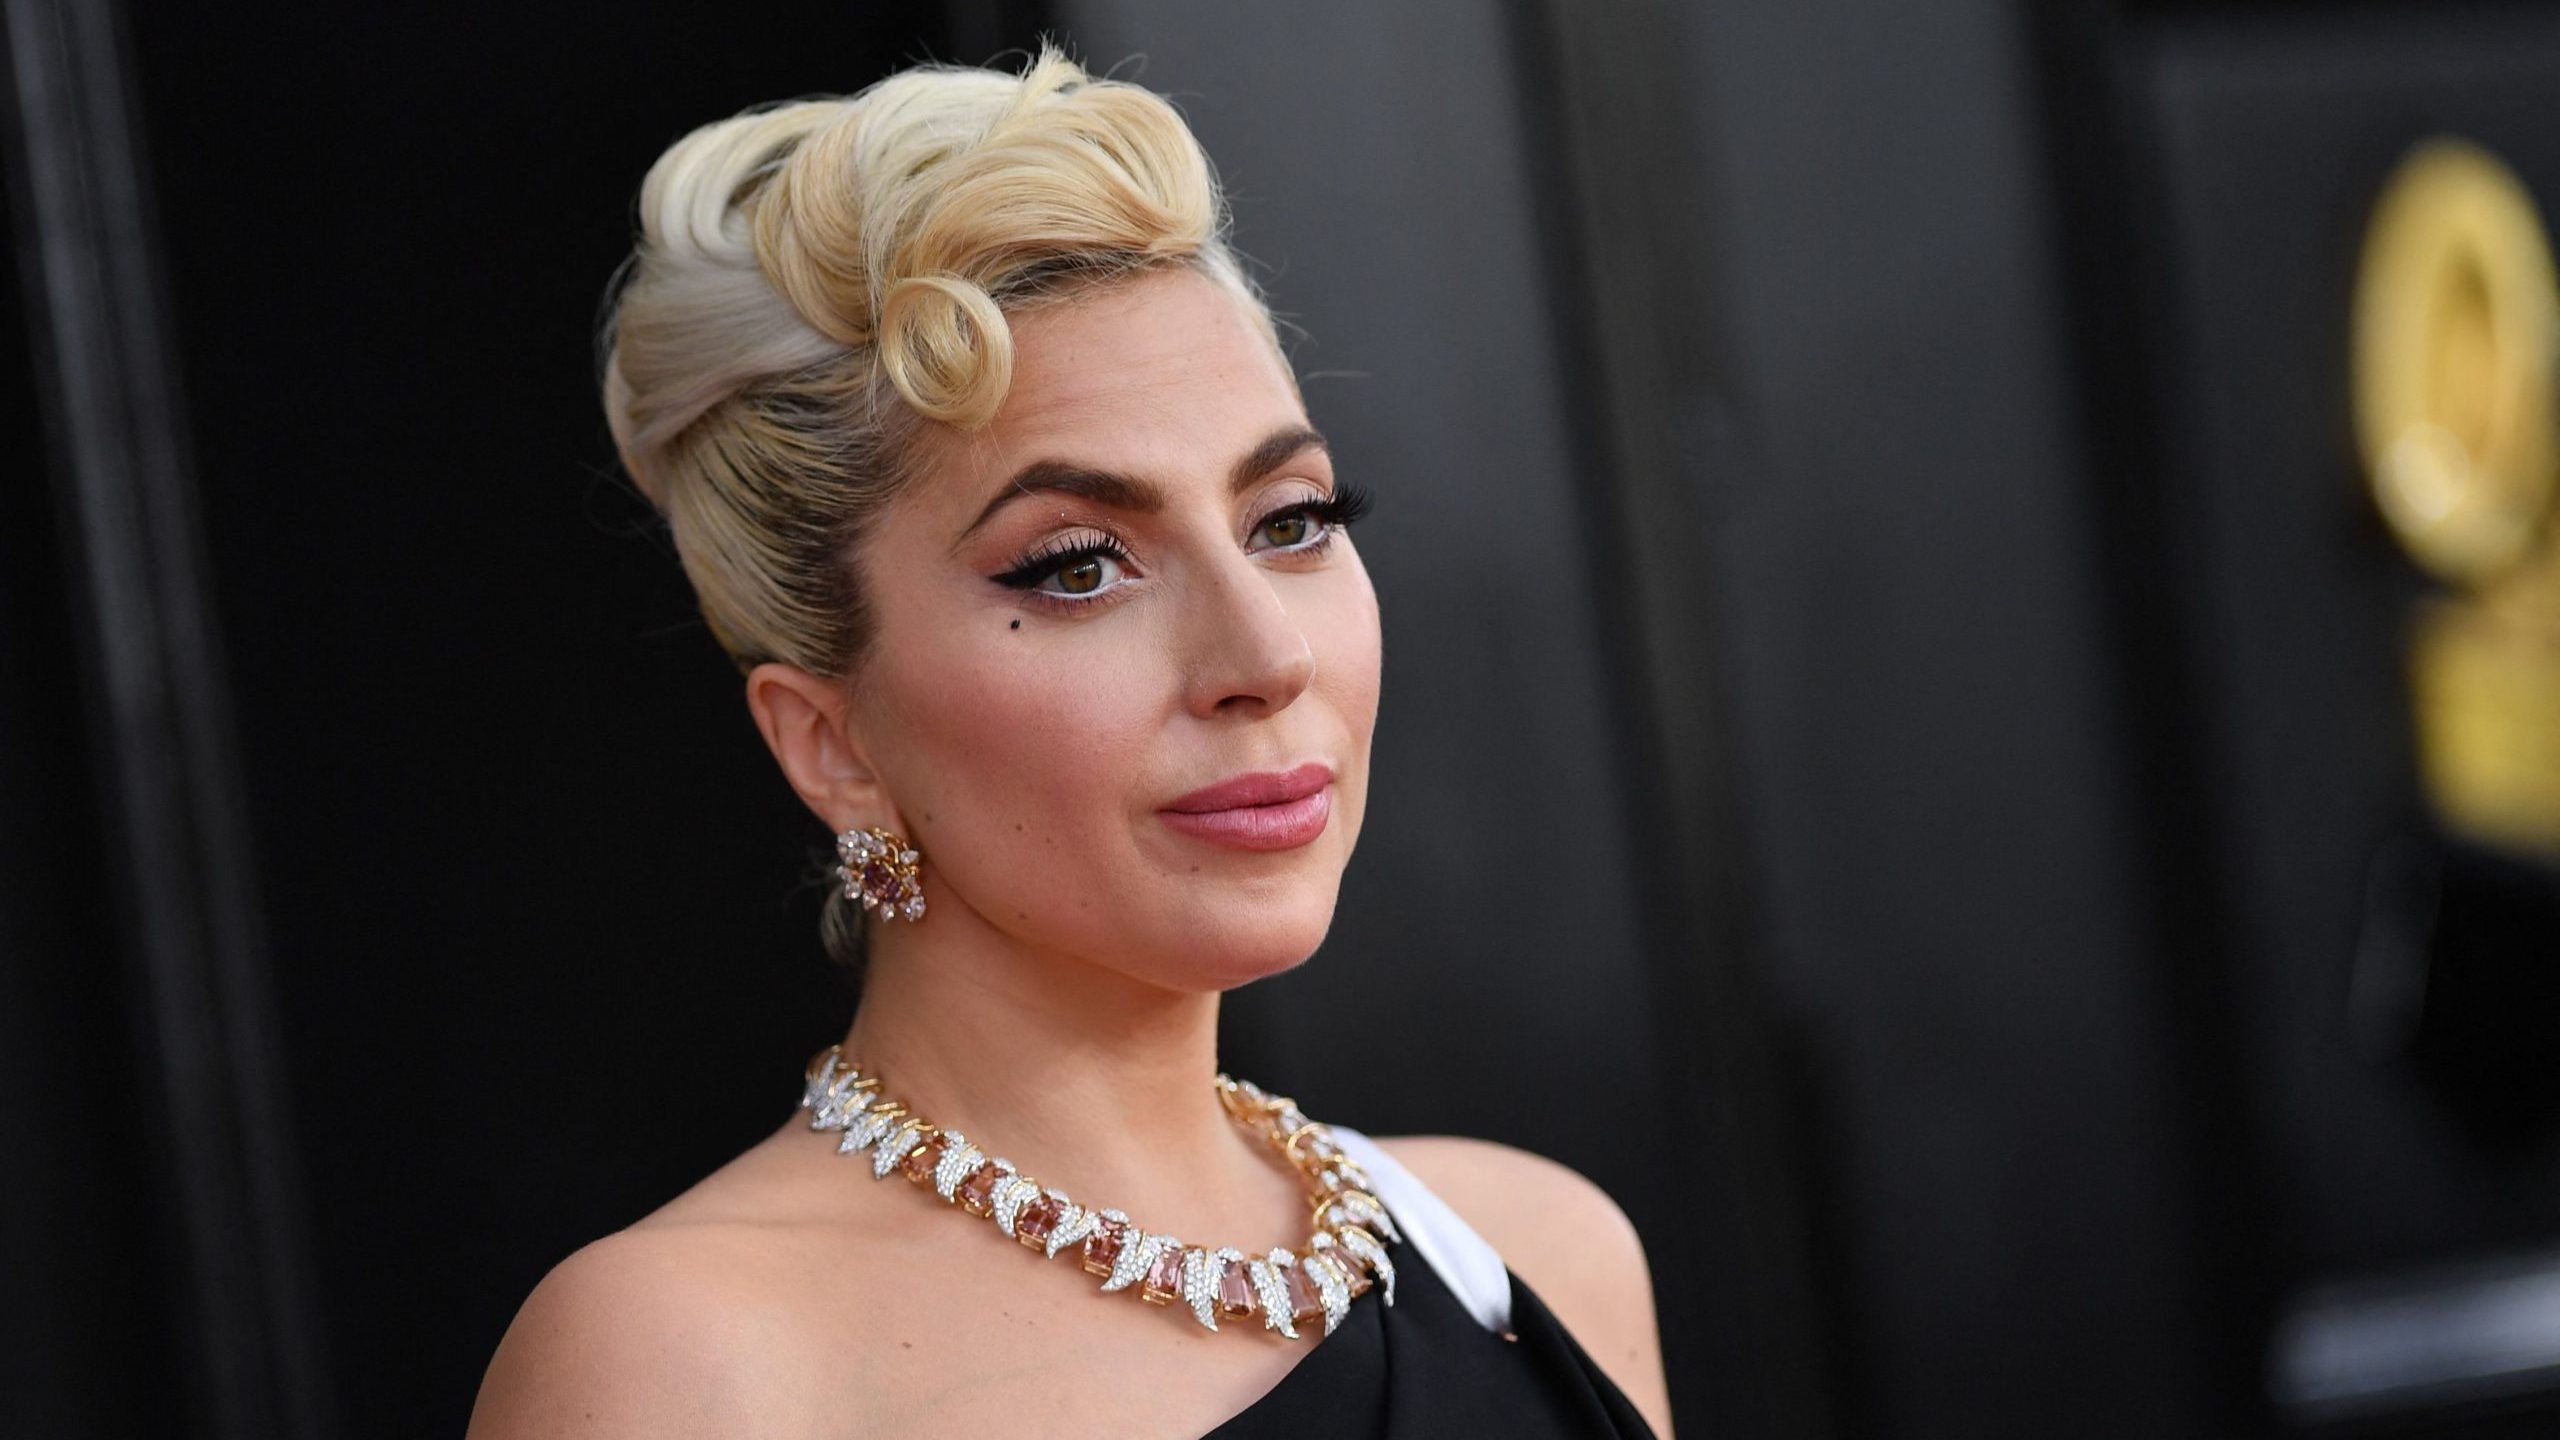 (FILES) In this file photo taken on April 03, 2022, US singer-songwriter Lady Gaga arrives for the 64th Annual Grammy Awards at the MGM Grand Garden Arena in Las Vegas. - US authorities on July 20, 2022, were searching for the suspect accused of shooting Lady Gaga's dog walker in 2021, months after he was accidentally released from custody. (Photo by ANGELA WEISS / AFP) (Photo by ANGELA WEISS/AFP via Getty Images)